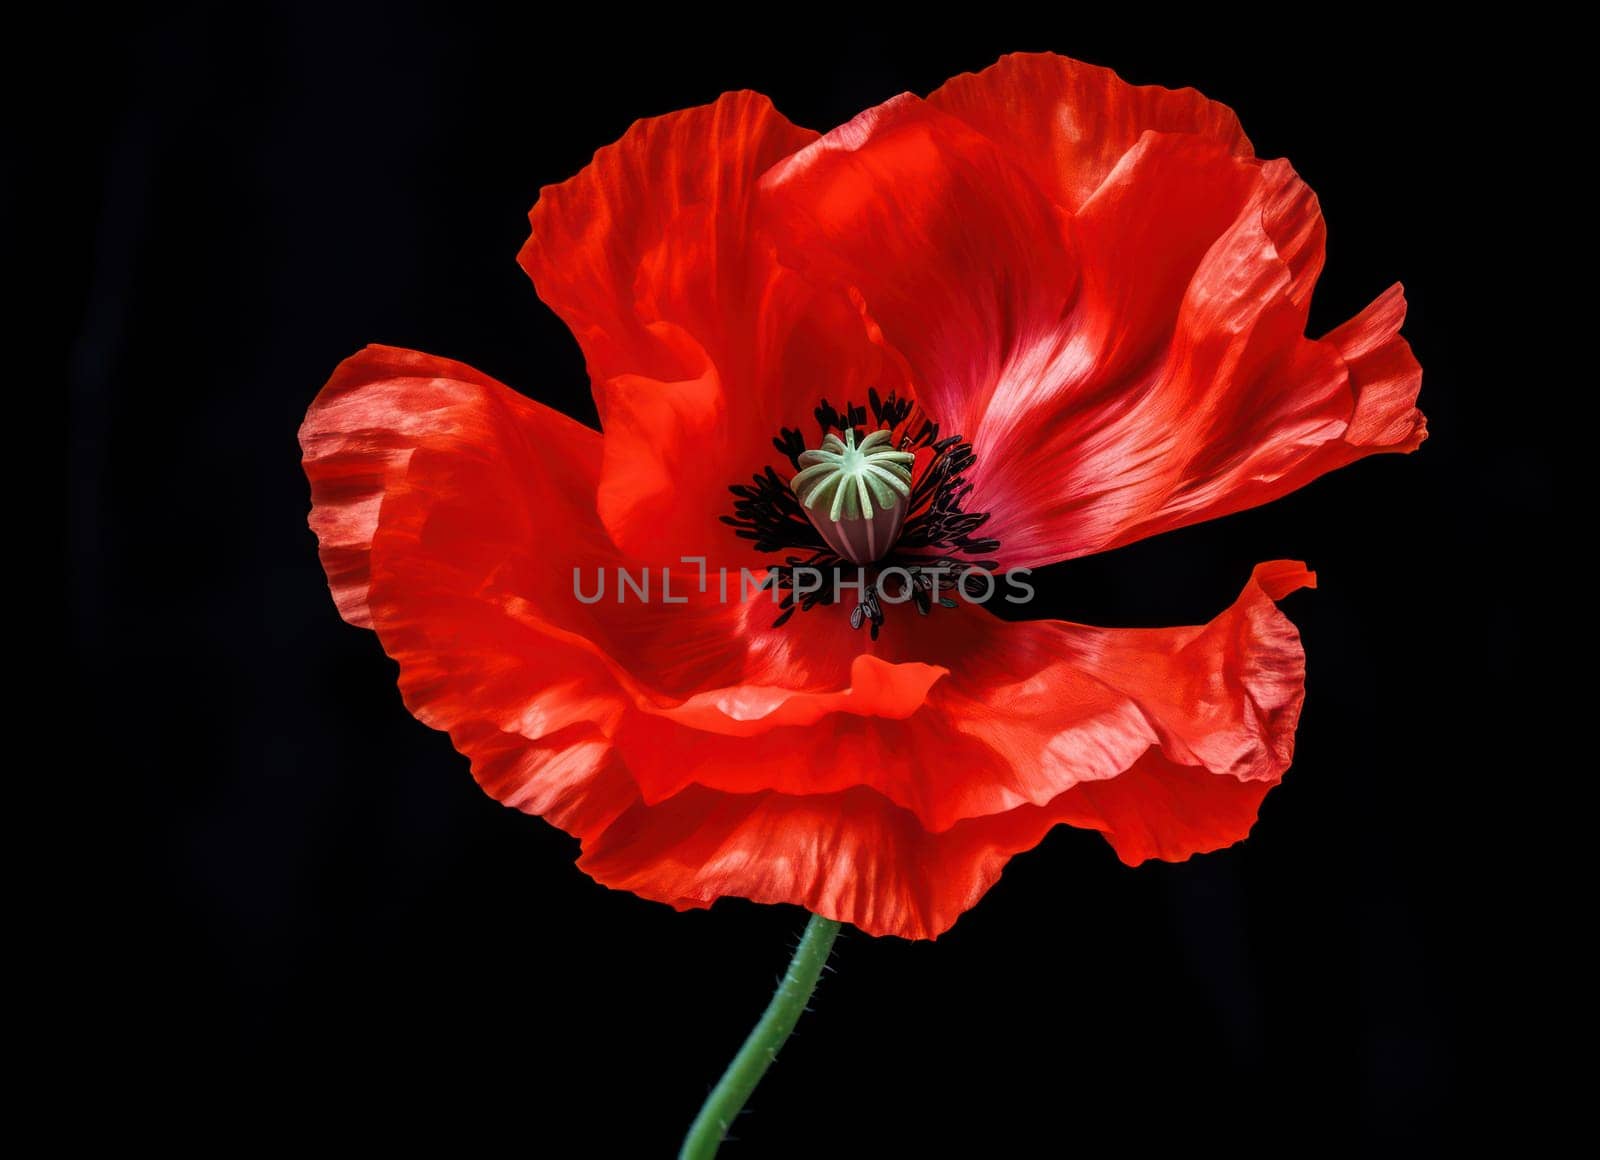 Red Poppy Beauty: Blooming Floral Delight on a Green Meadow by Vichizh